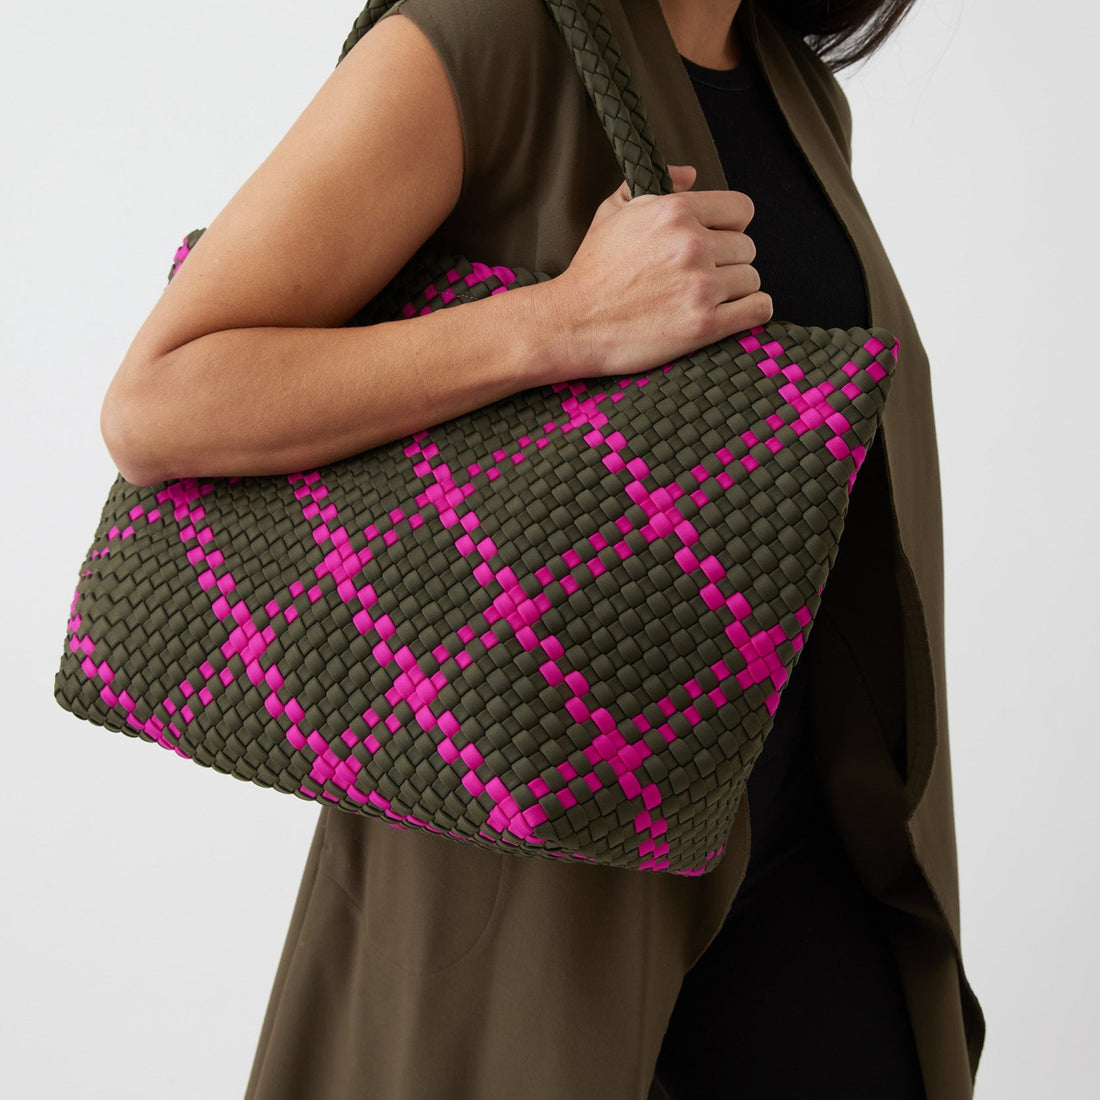 Andreina Bags Siempre tote bag in army green colour with magenta pink criss cross stripes. Colour name is Army Pink. Large size yet lightweight. Handmade, interlaced material, synthetic material, water resistant, machine washable. Designed in Sydney, Australia.